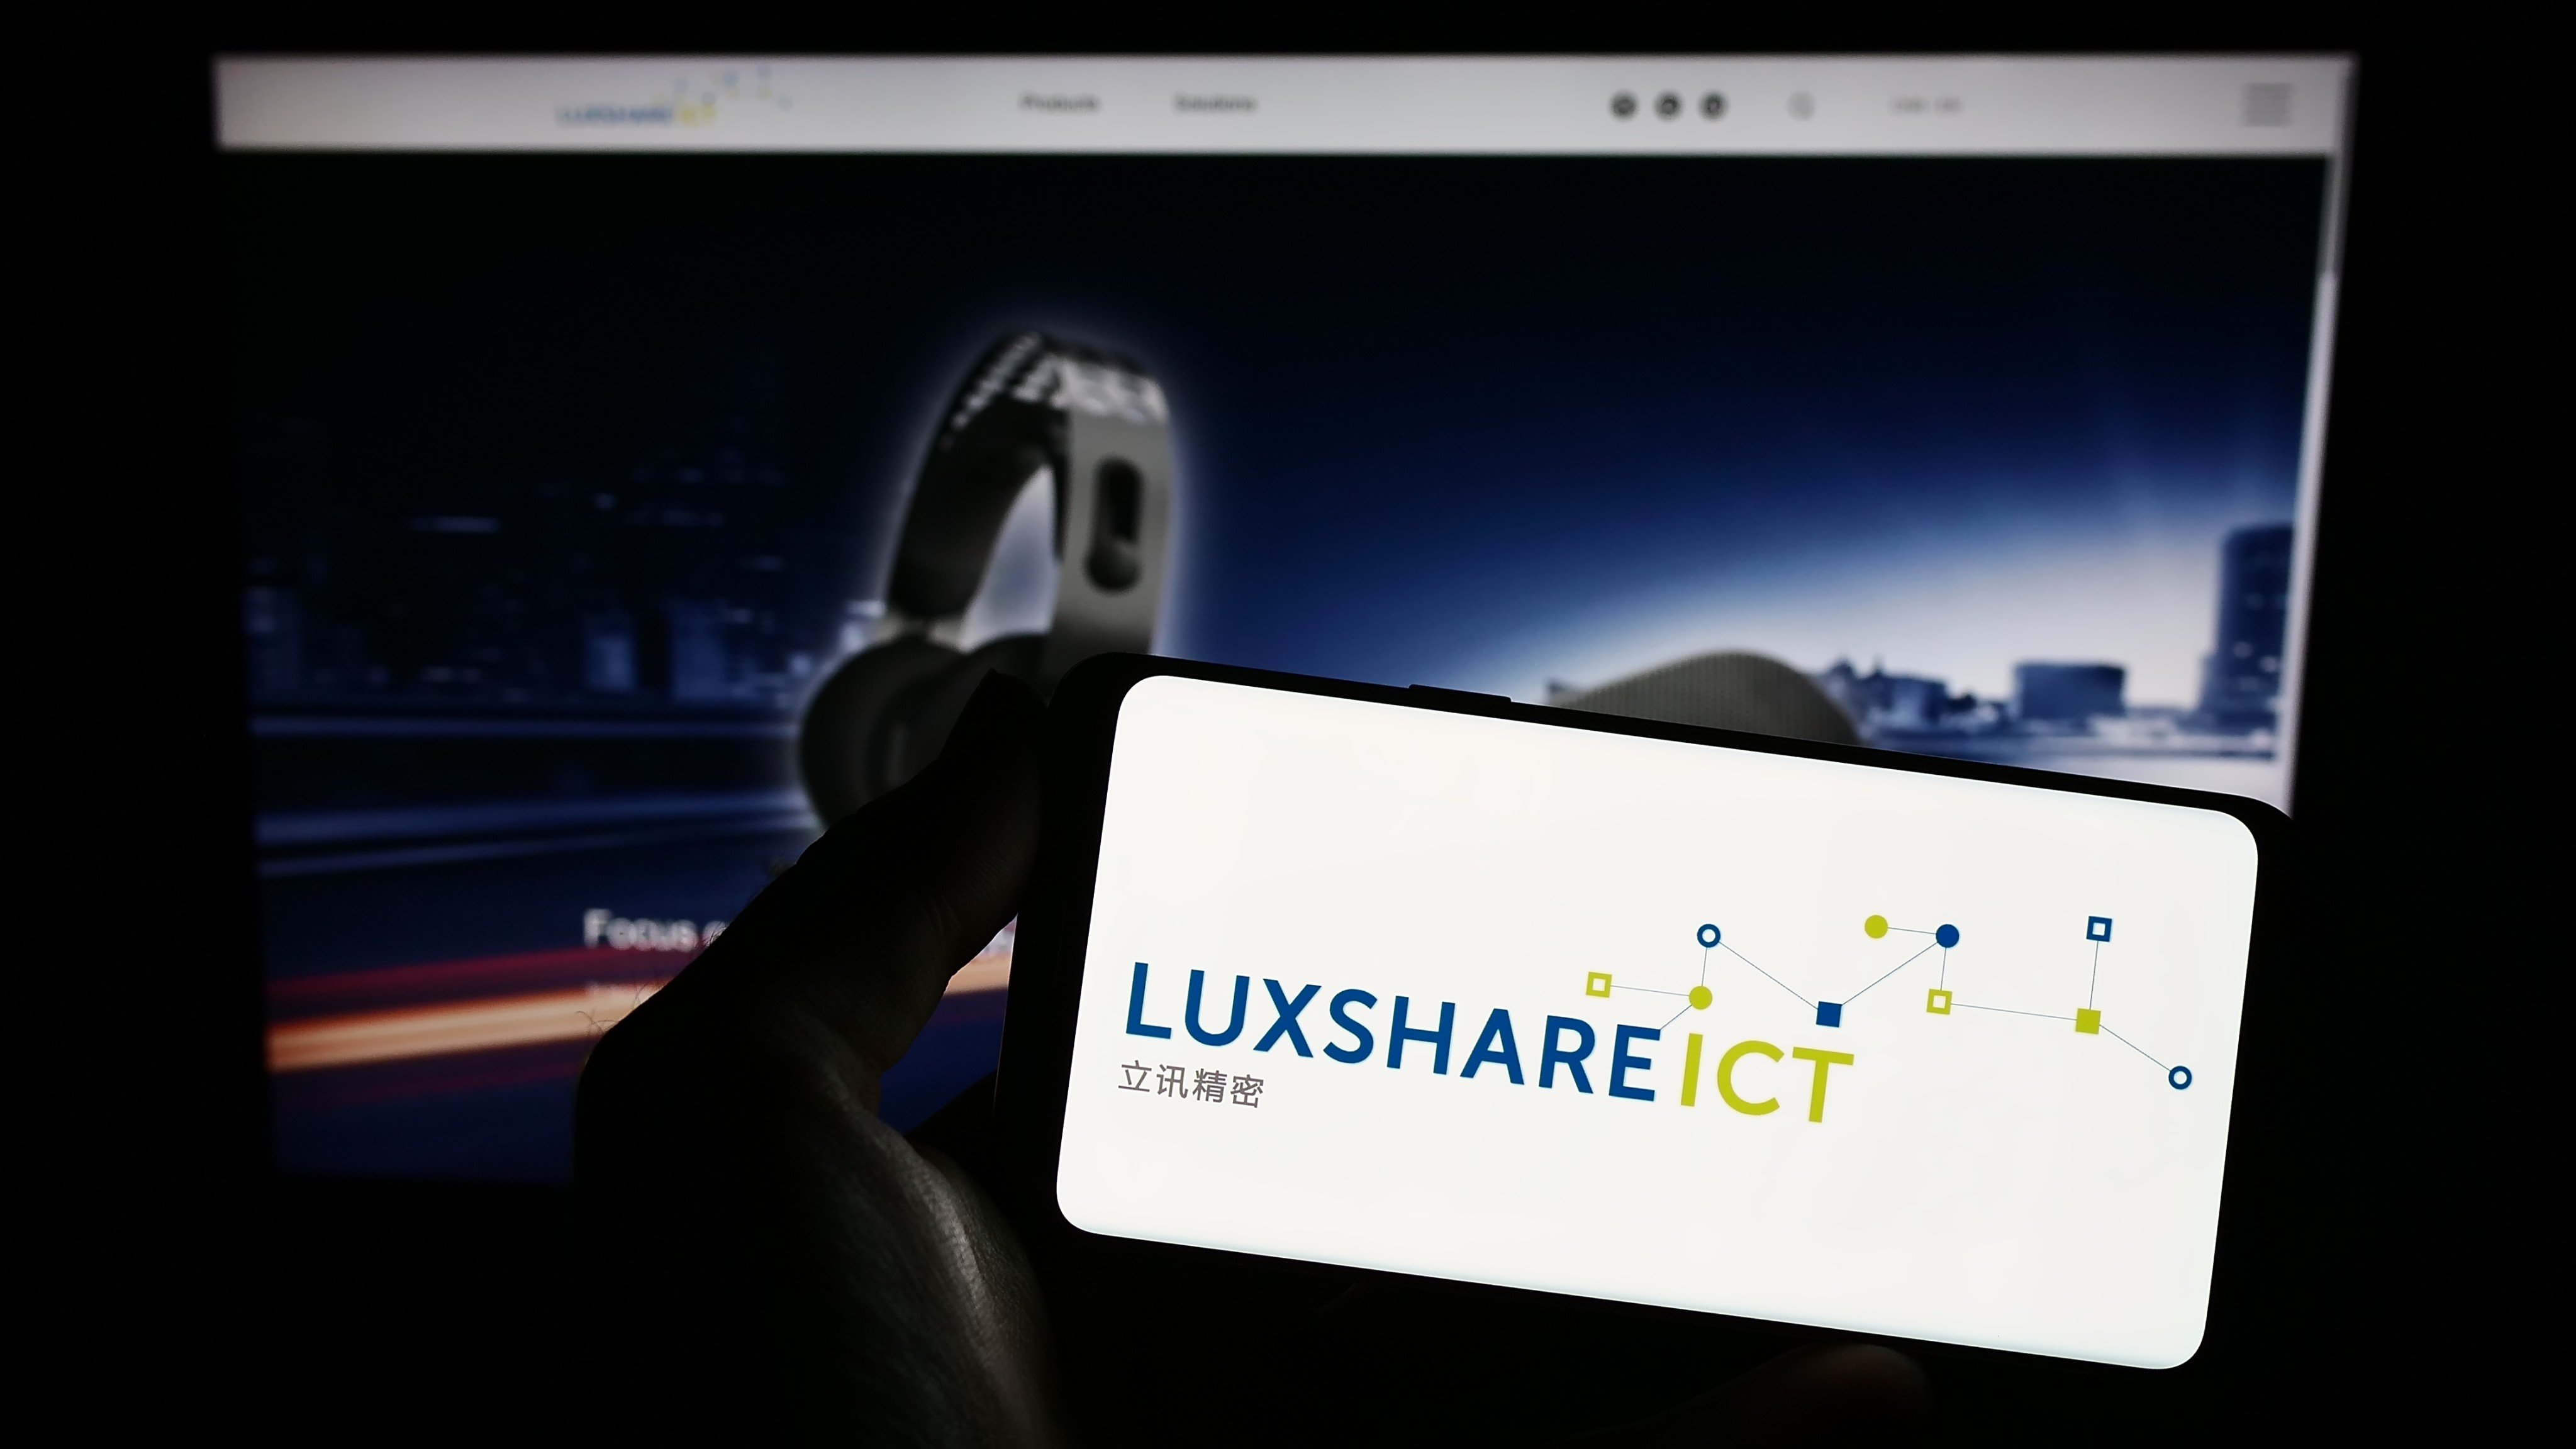 Shenzhen-based Luxshare Precision Industry Co, also known as Luxshare-ICT, makes a range of Apple products, including iPhones, iPod, Apple Watch and mixed-reality headset Vision Pro. Photo: Shutterstock